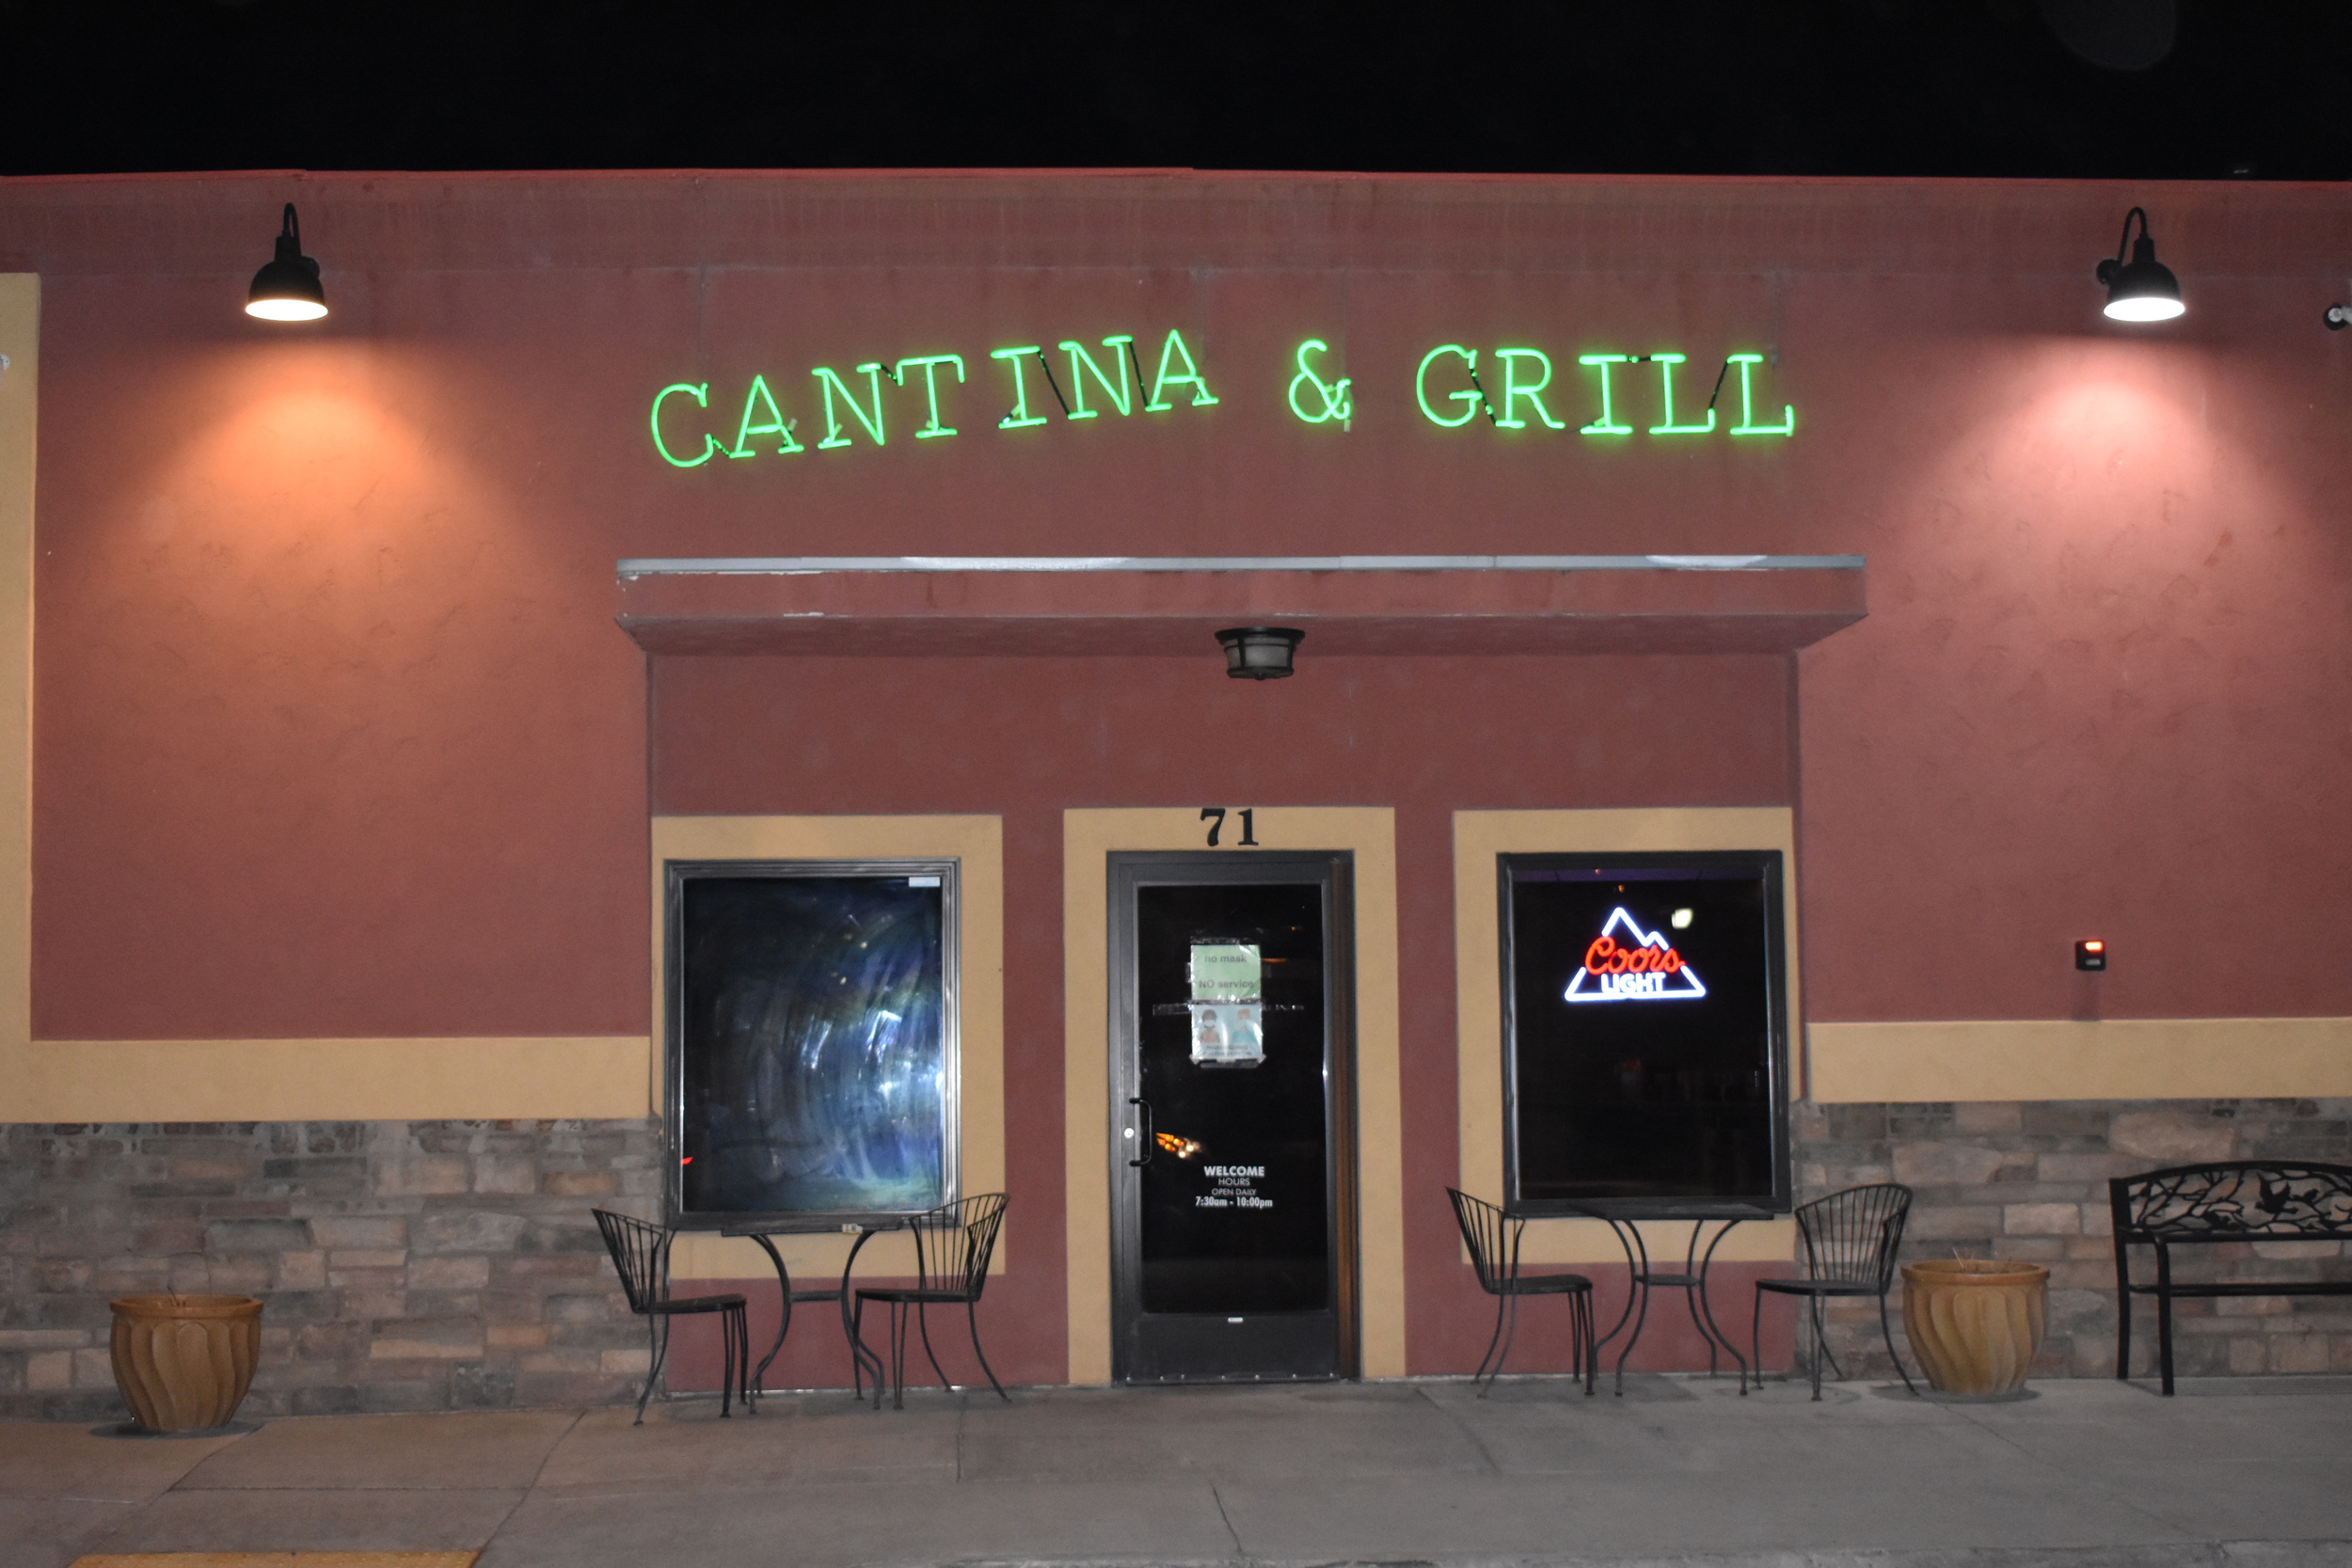 Cantina & Grill wall mounted sign, Winnemucca, Nevada